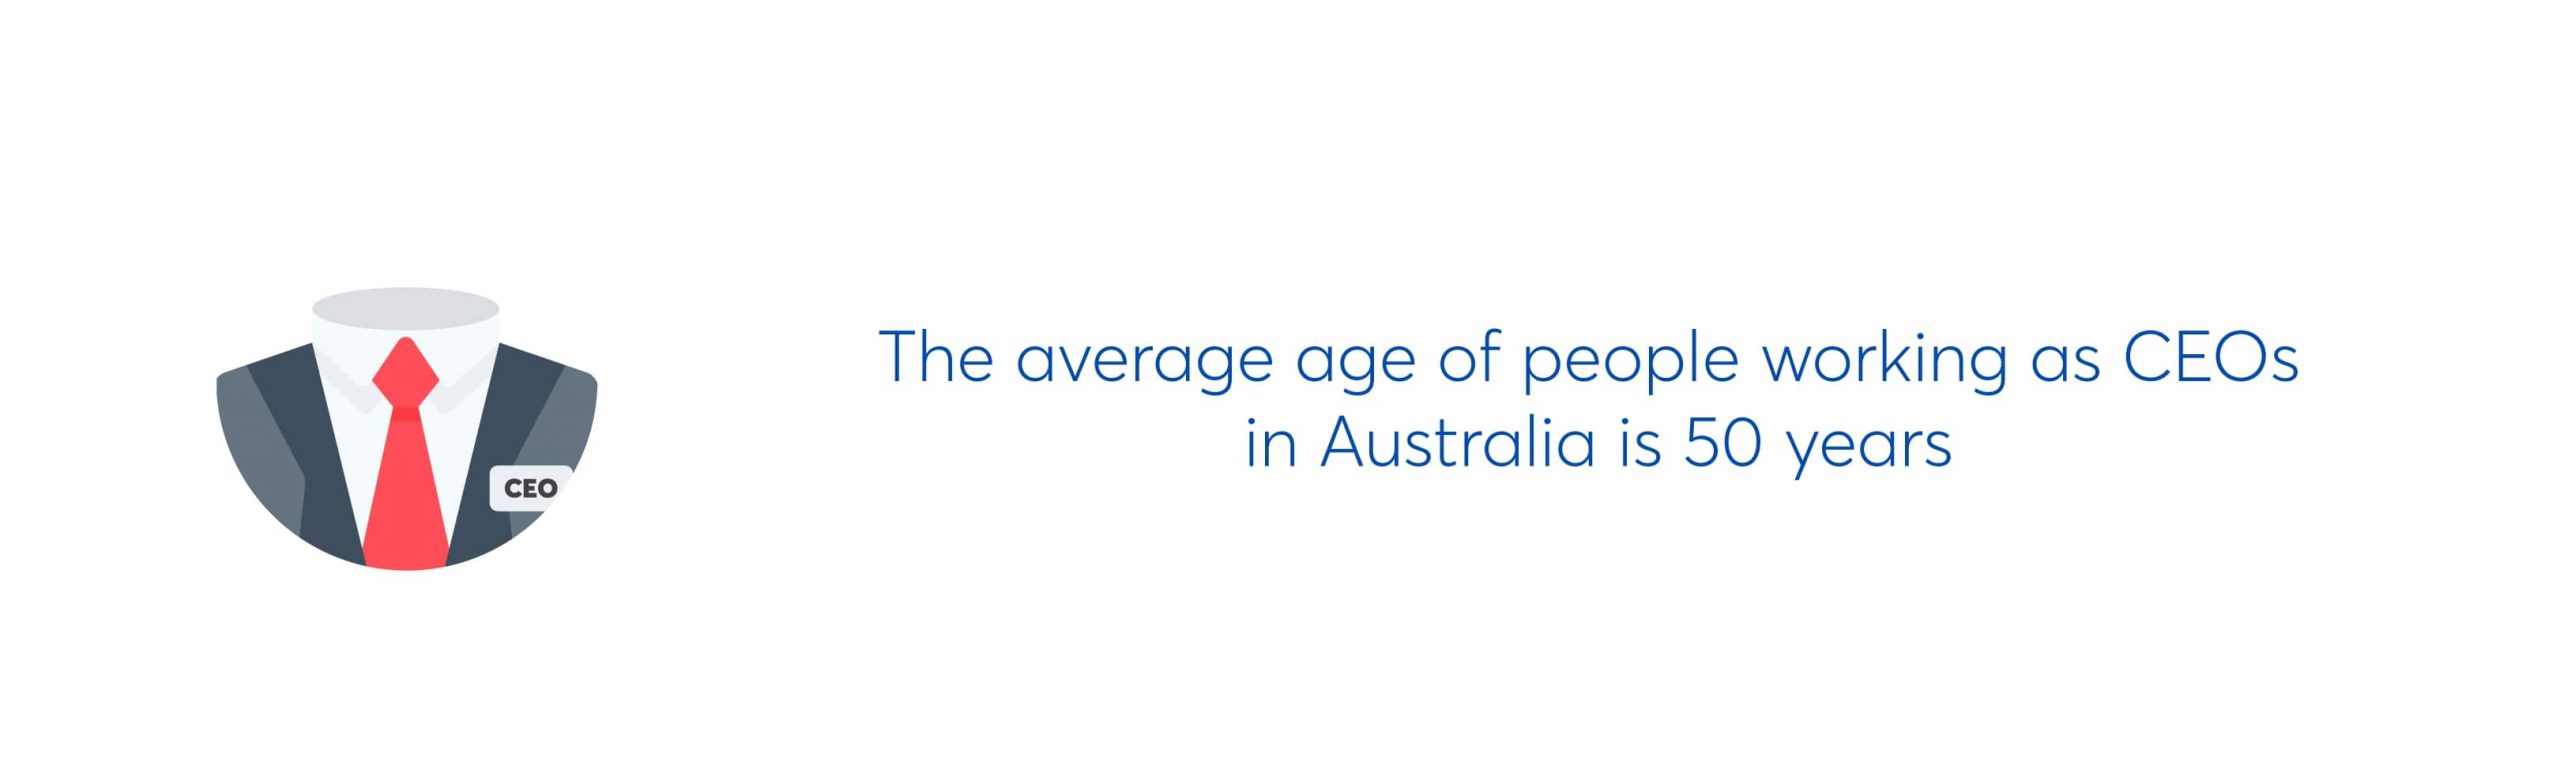 the average age of people working as CEOs in australia is 50 years